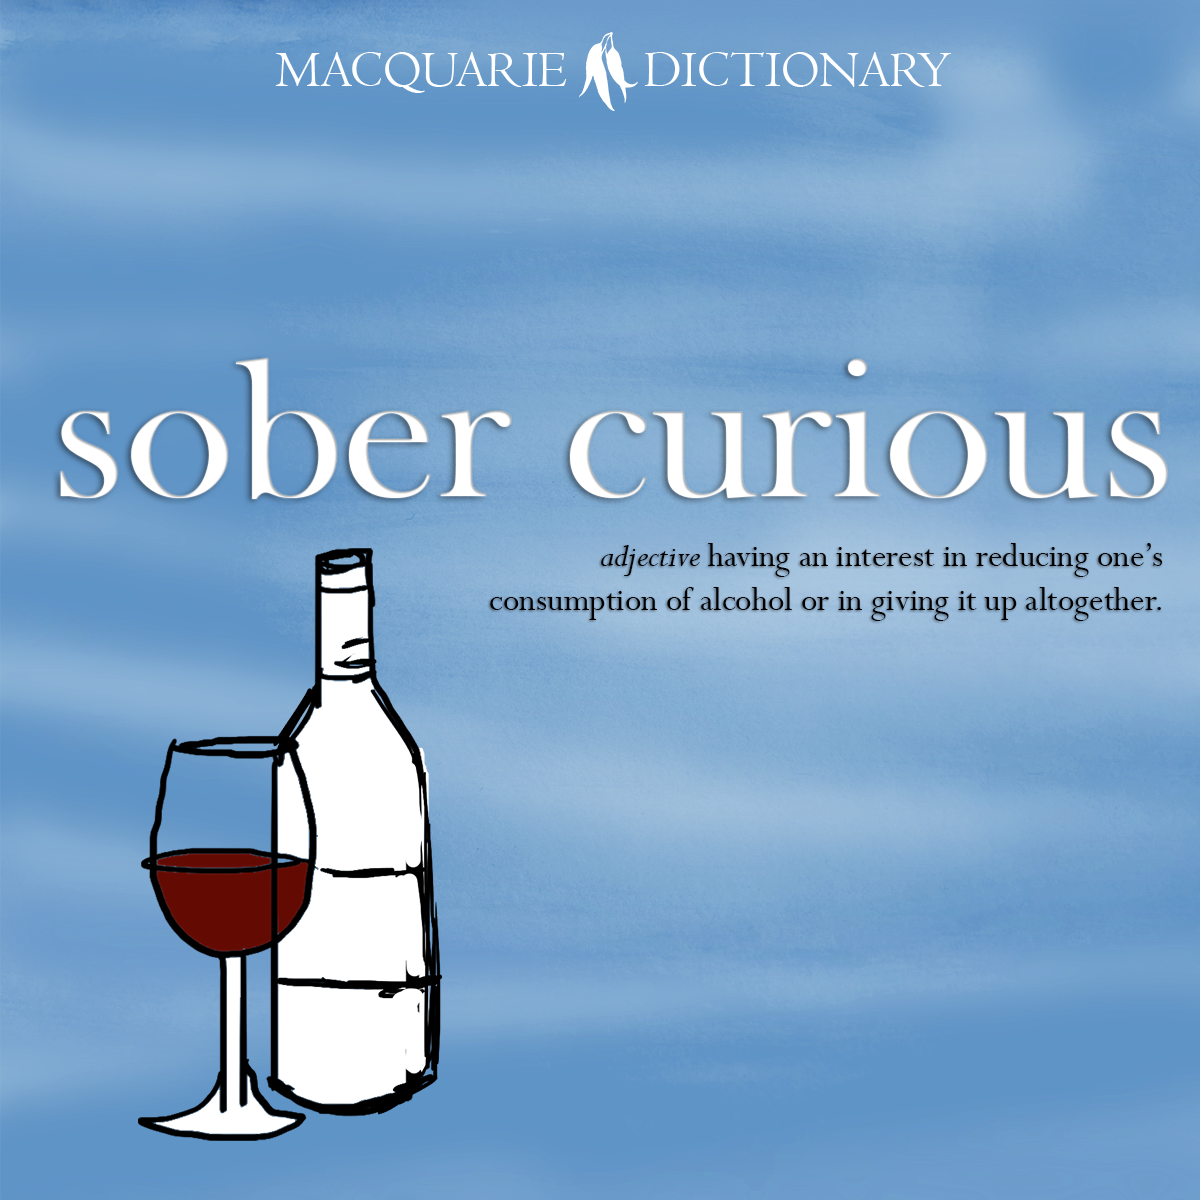 Word of the Year 2021 - sober curious